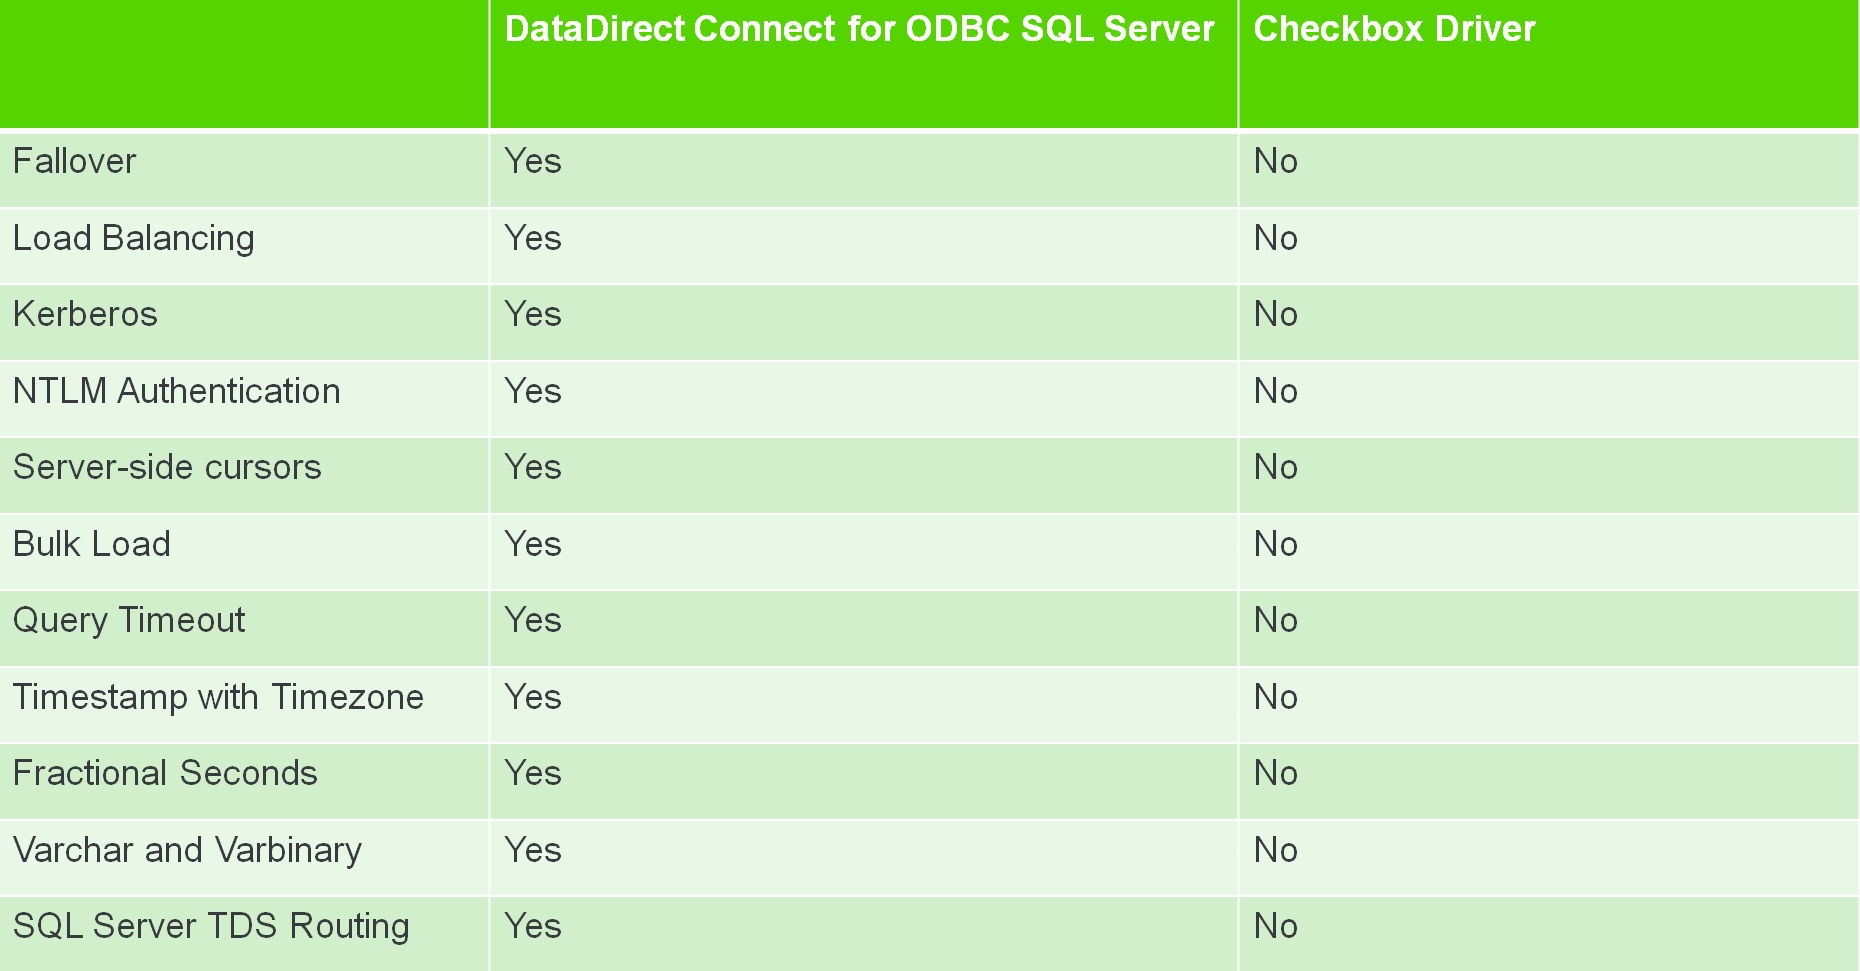 datadirect connect for odbc